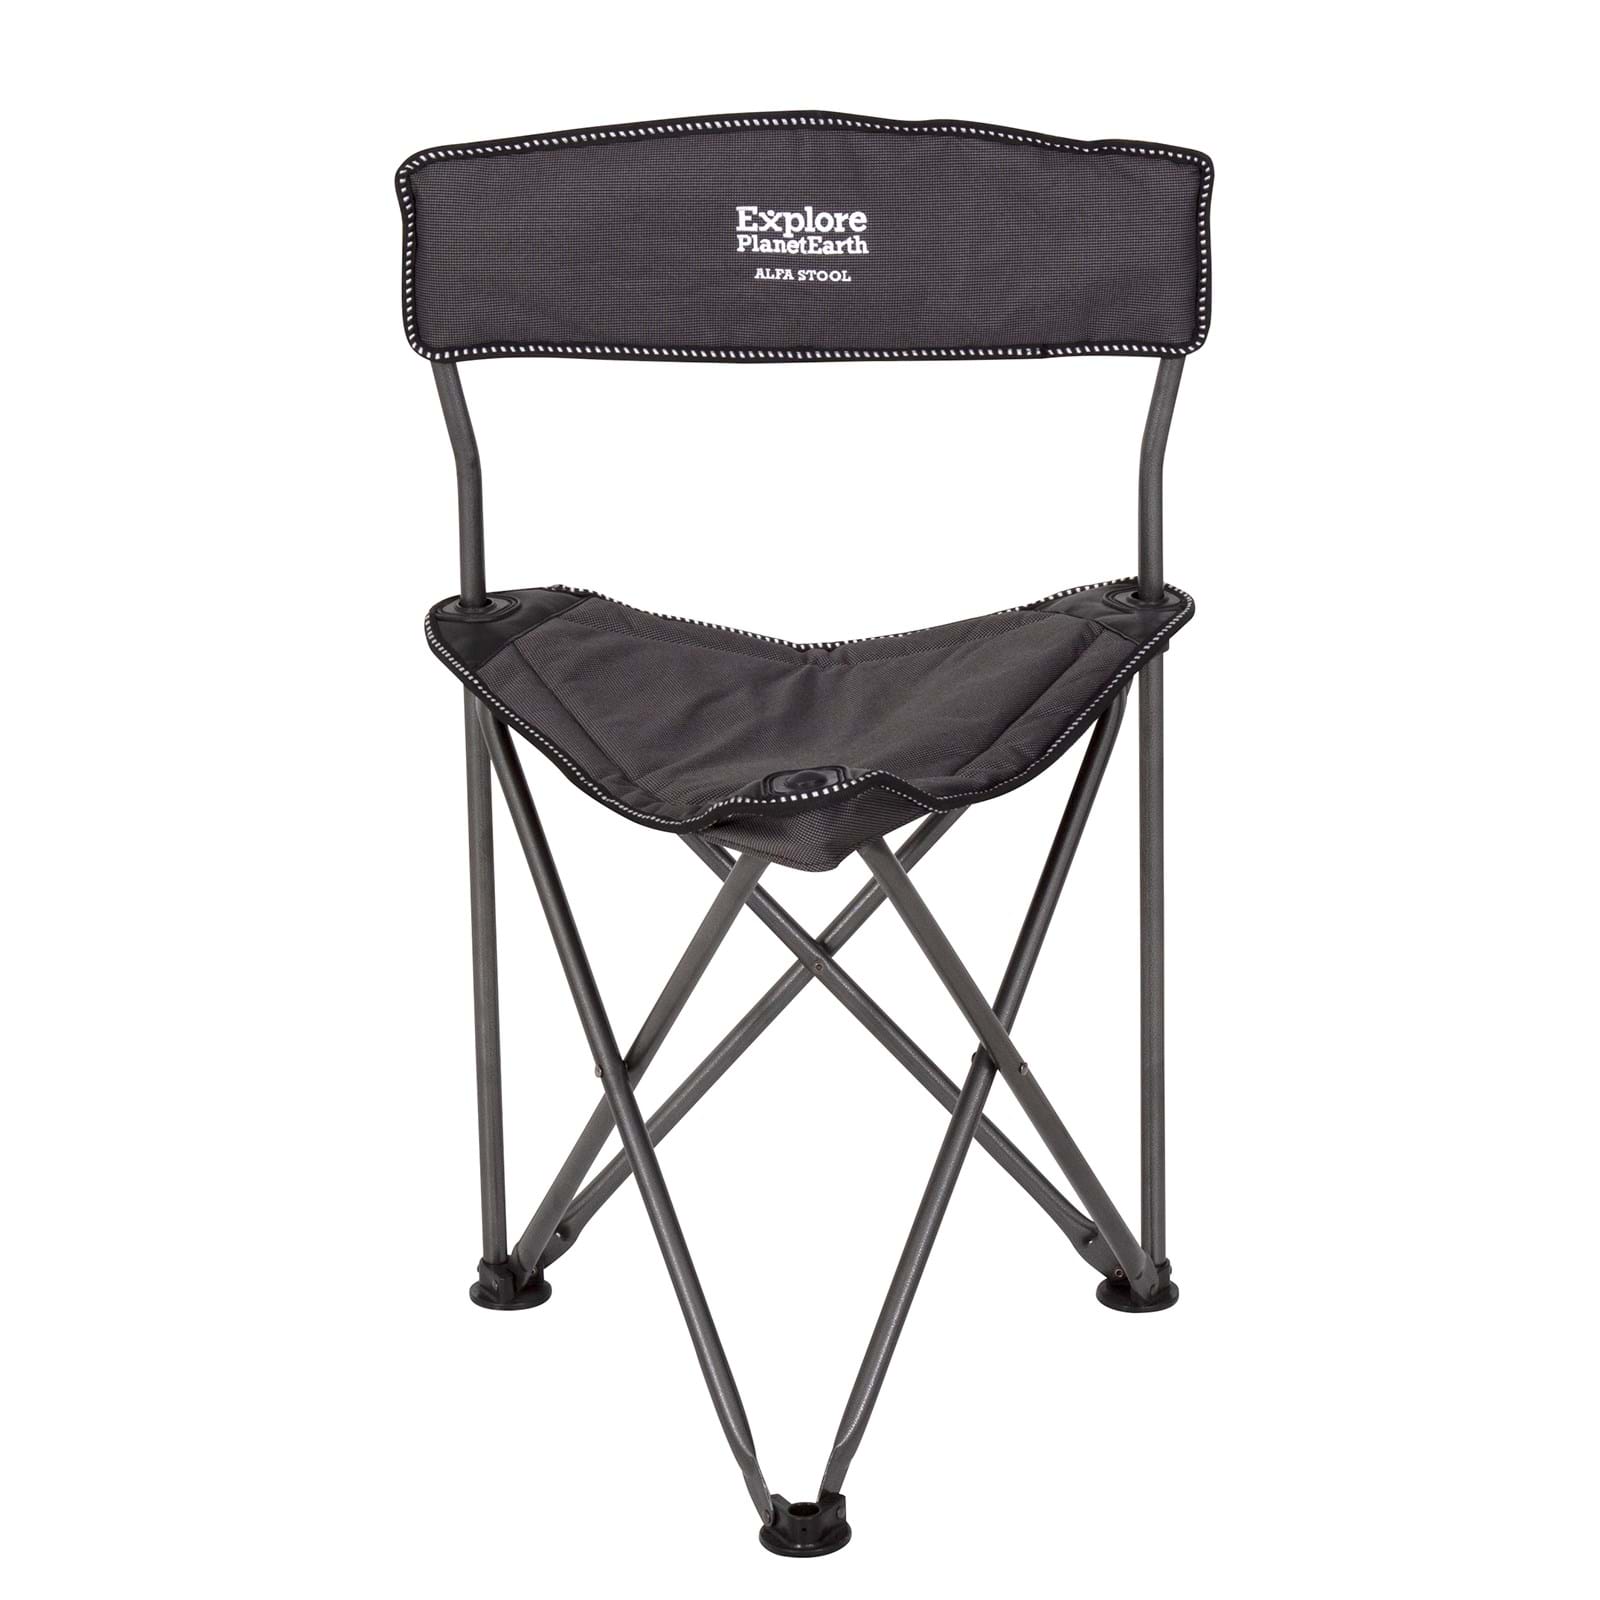 camp stools for sale  camping gear  explore planet earth